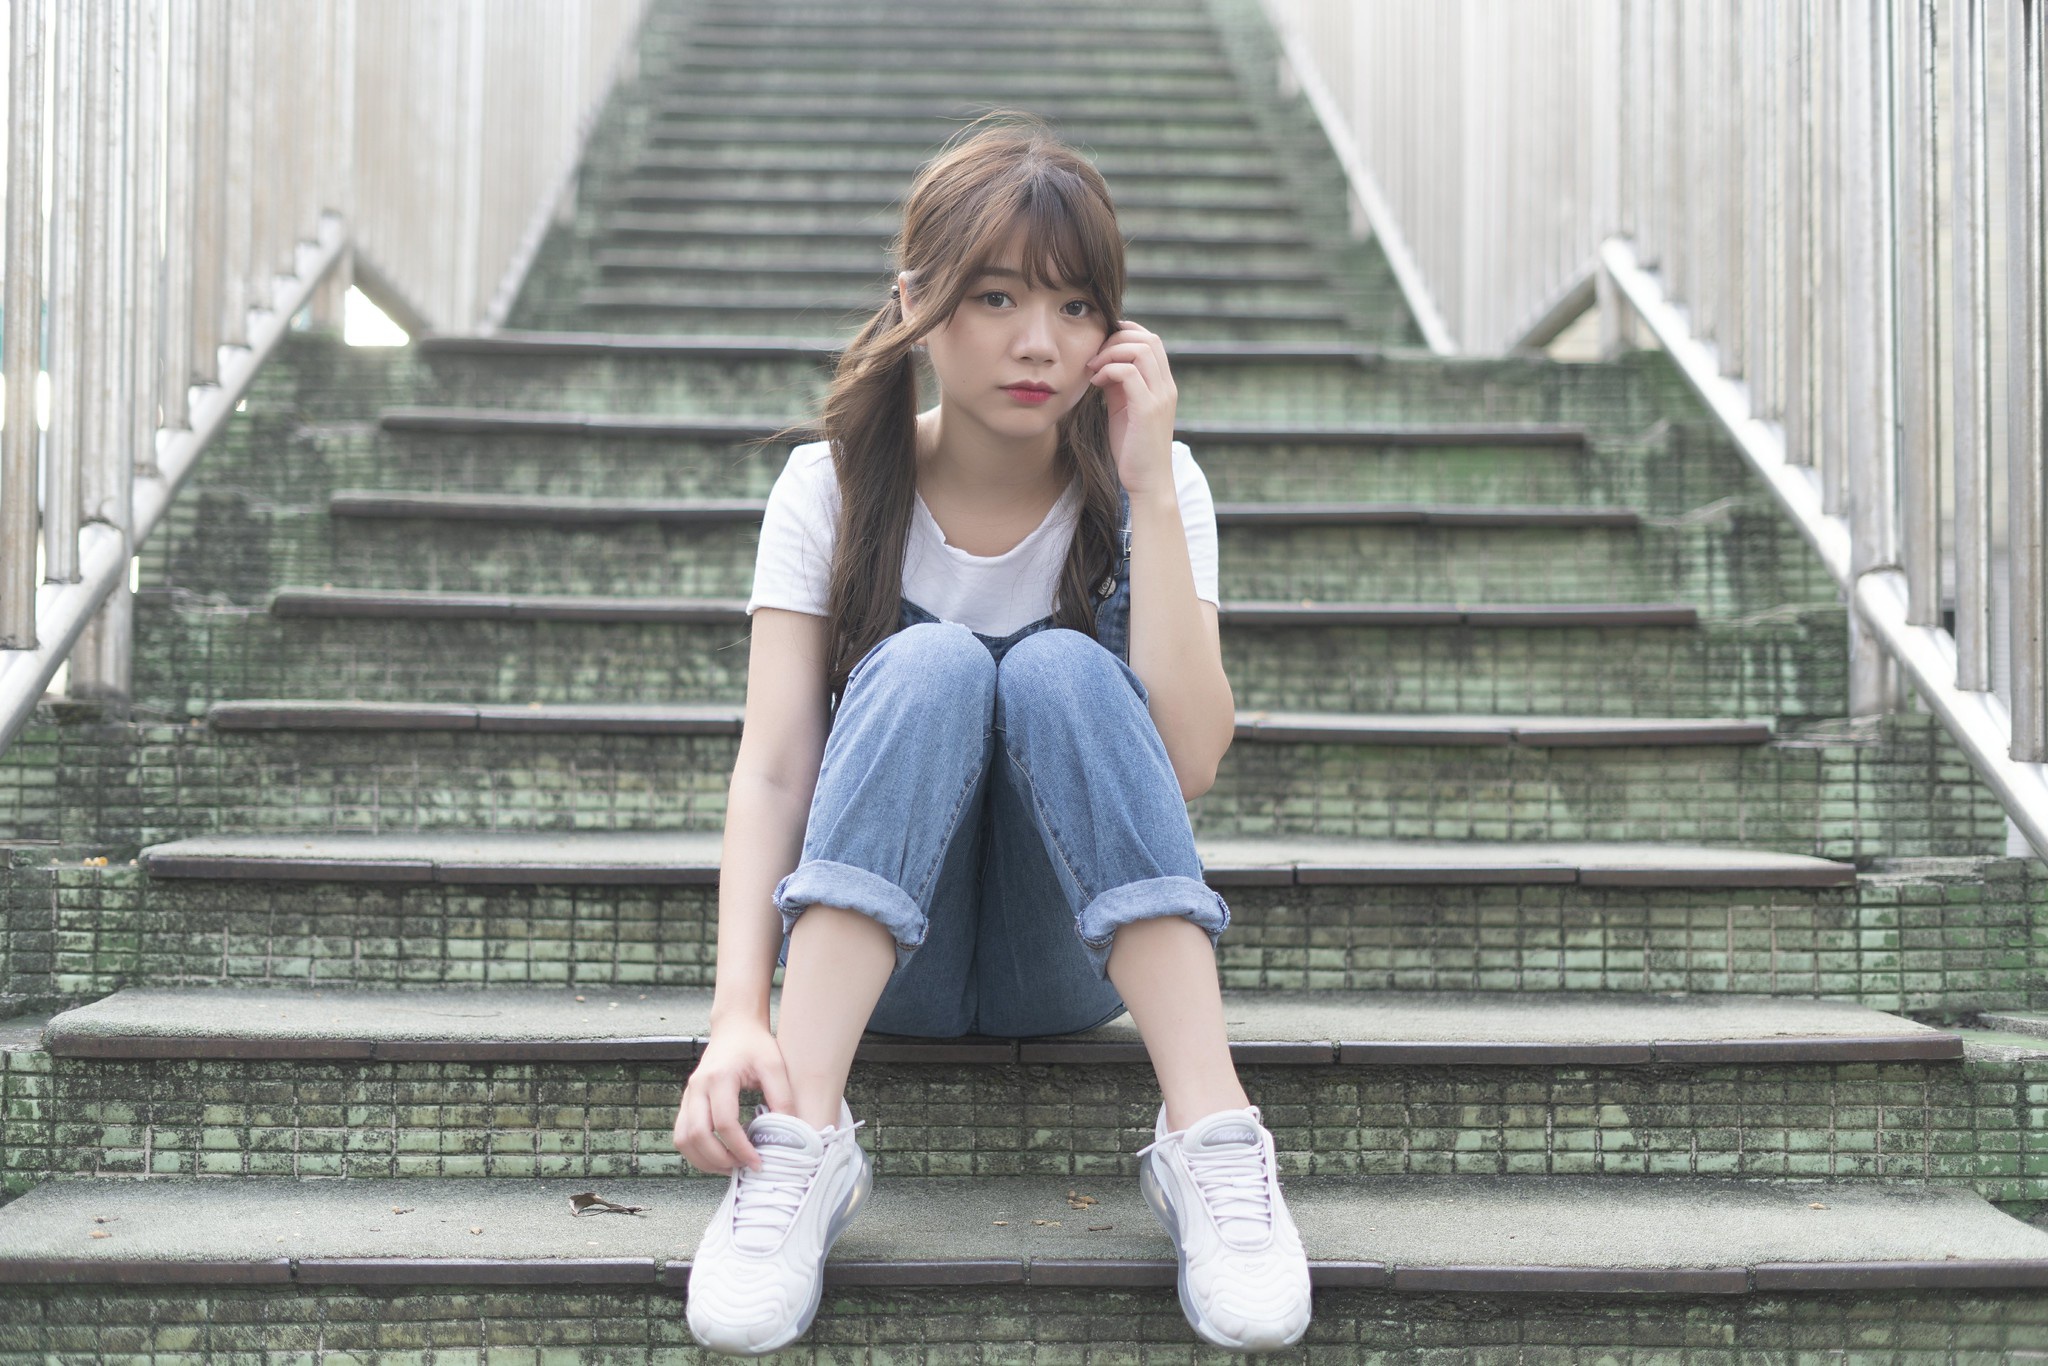 People 2048x1366 Asian model women long hair brunette sitting sneakers jeans stairs white shirt twintails